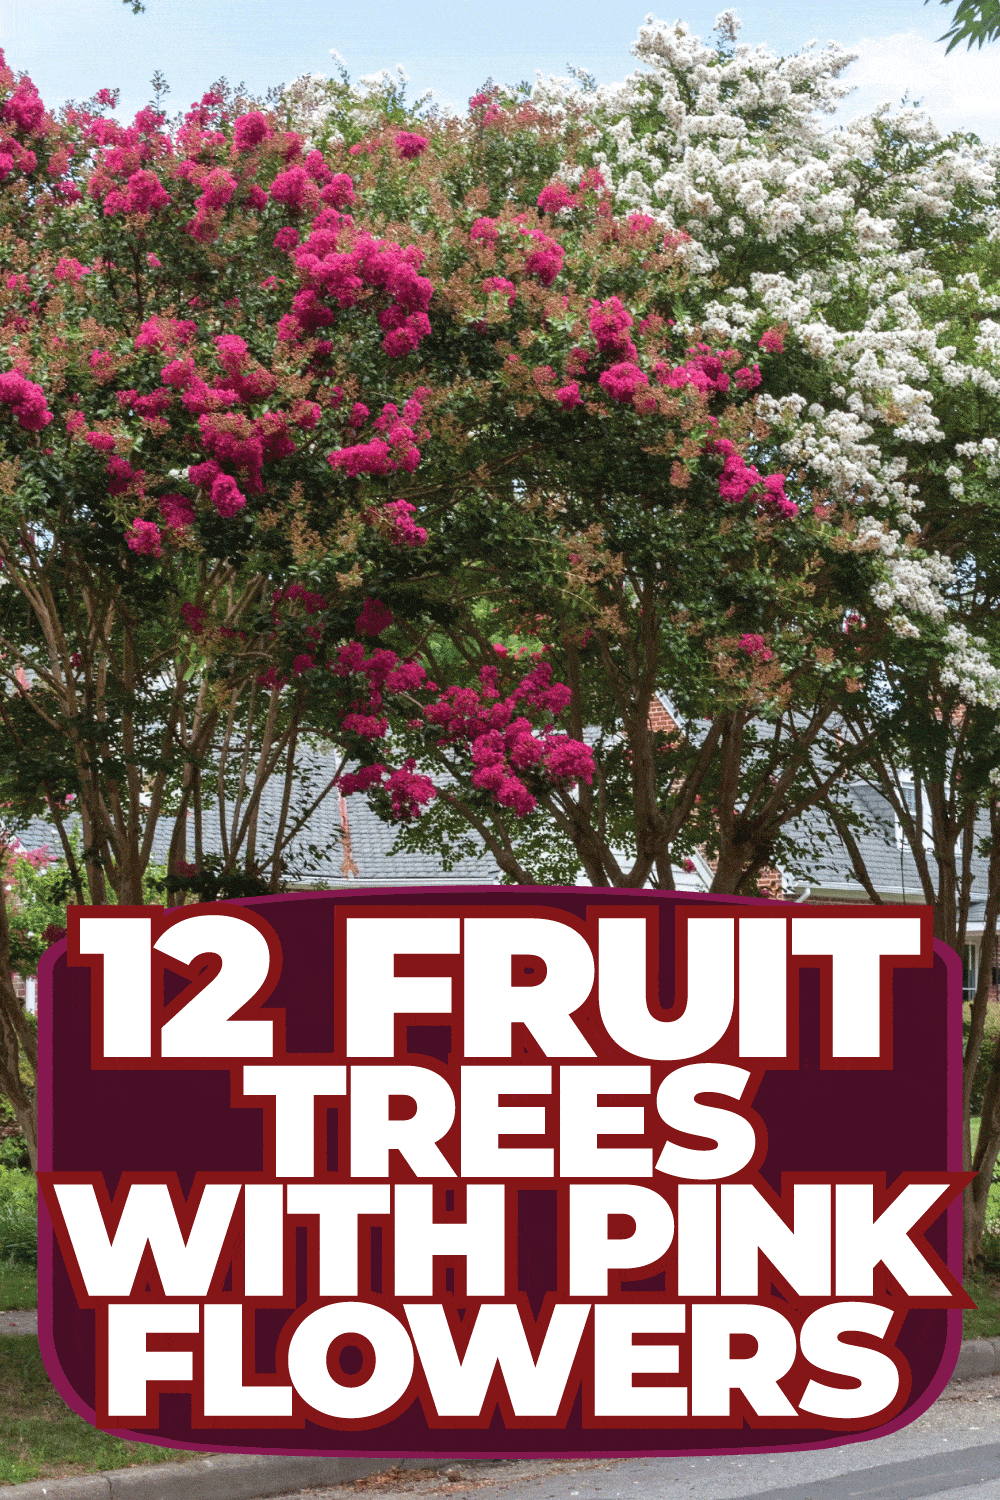 12 Fruit Trees With Pink Flowers